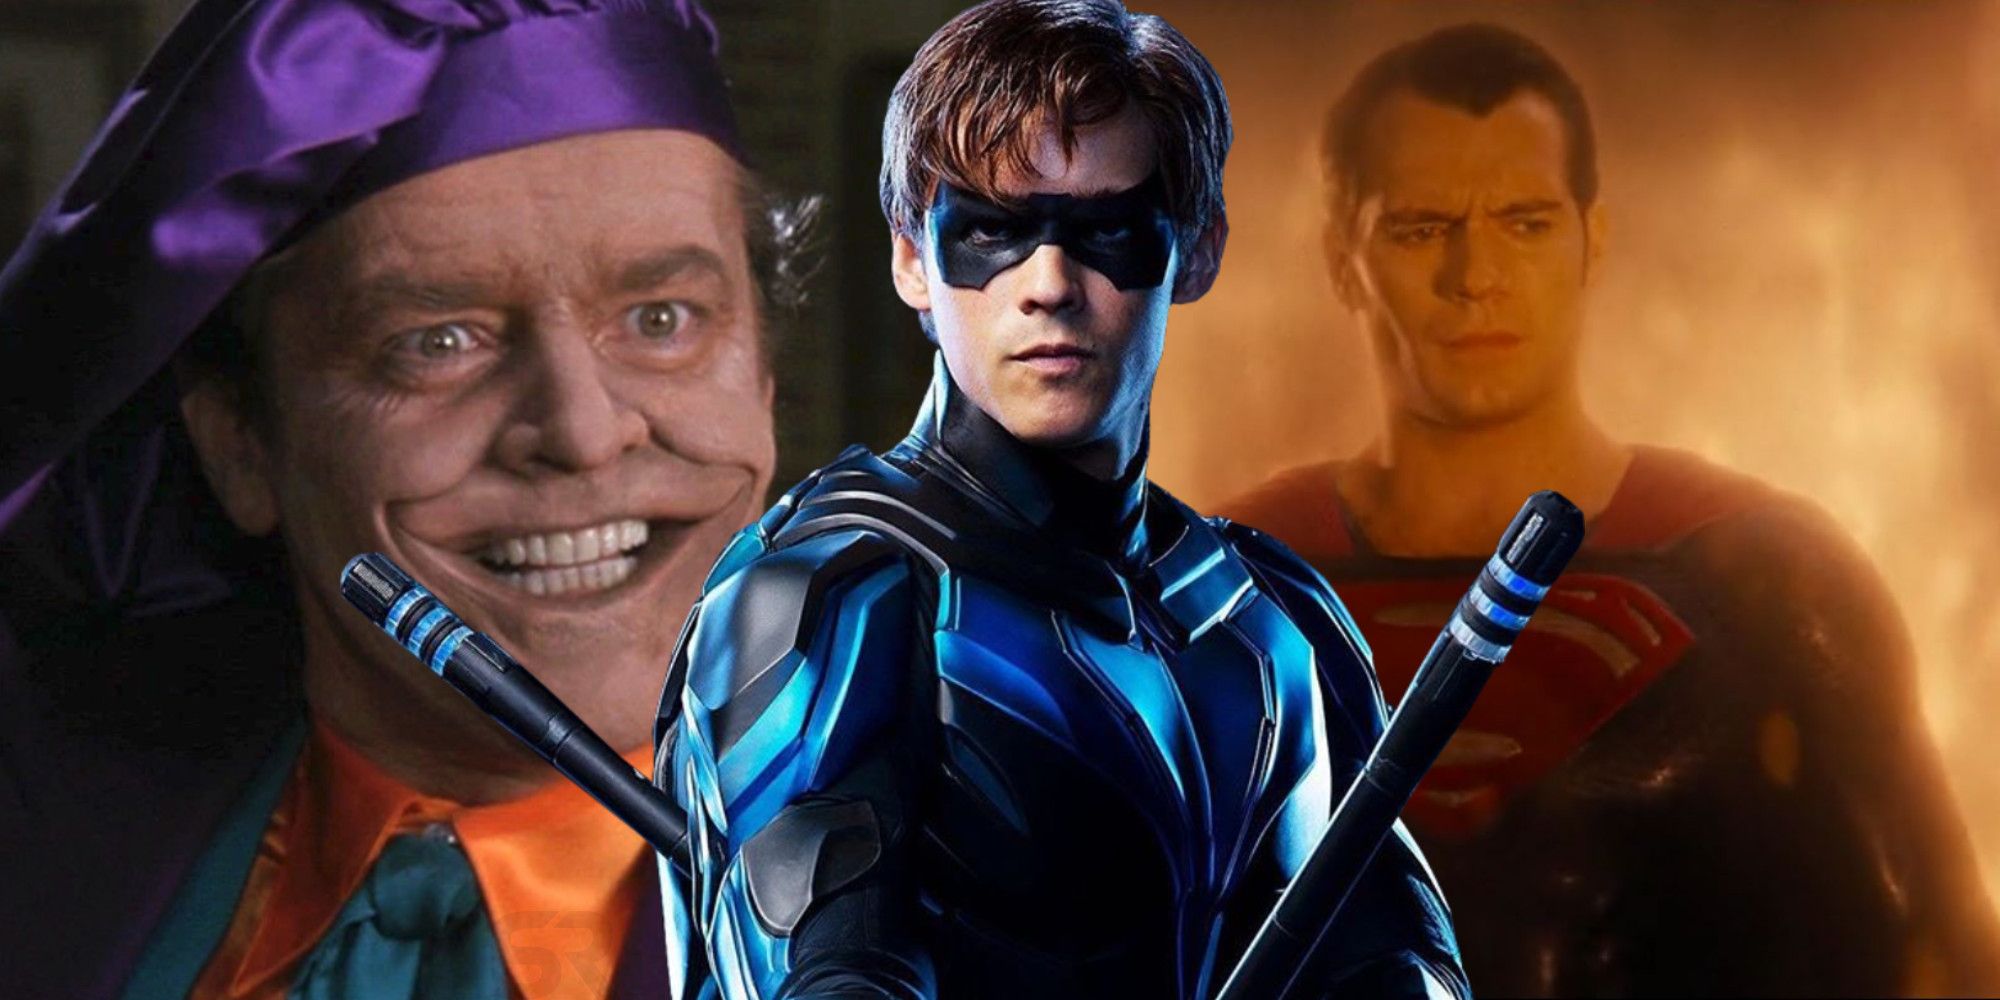 Titans Season 3s Best Trick Is Combining Different DC Movies